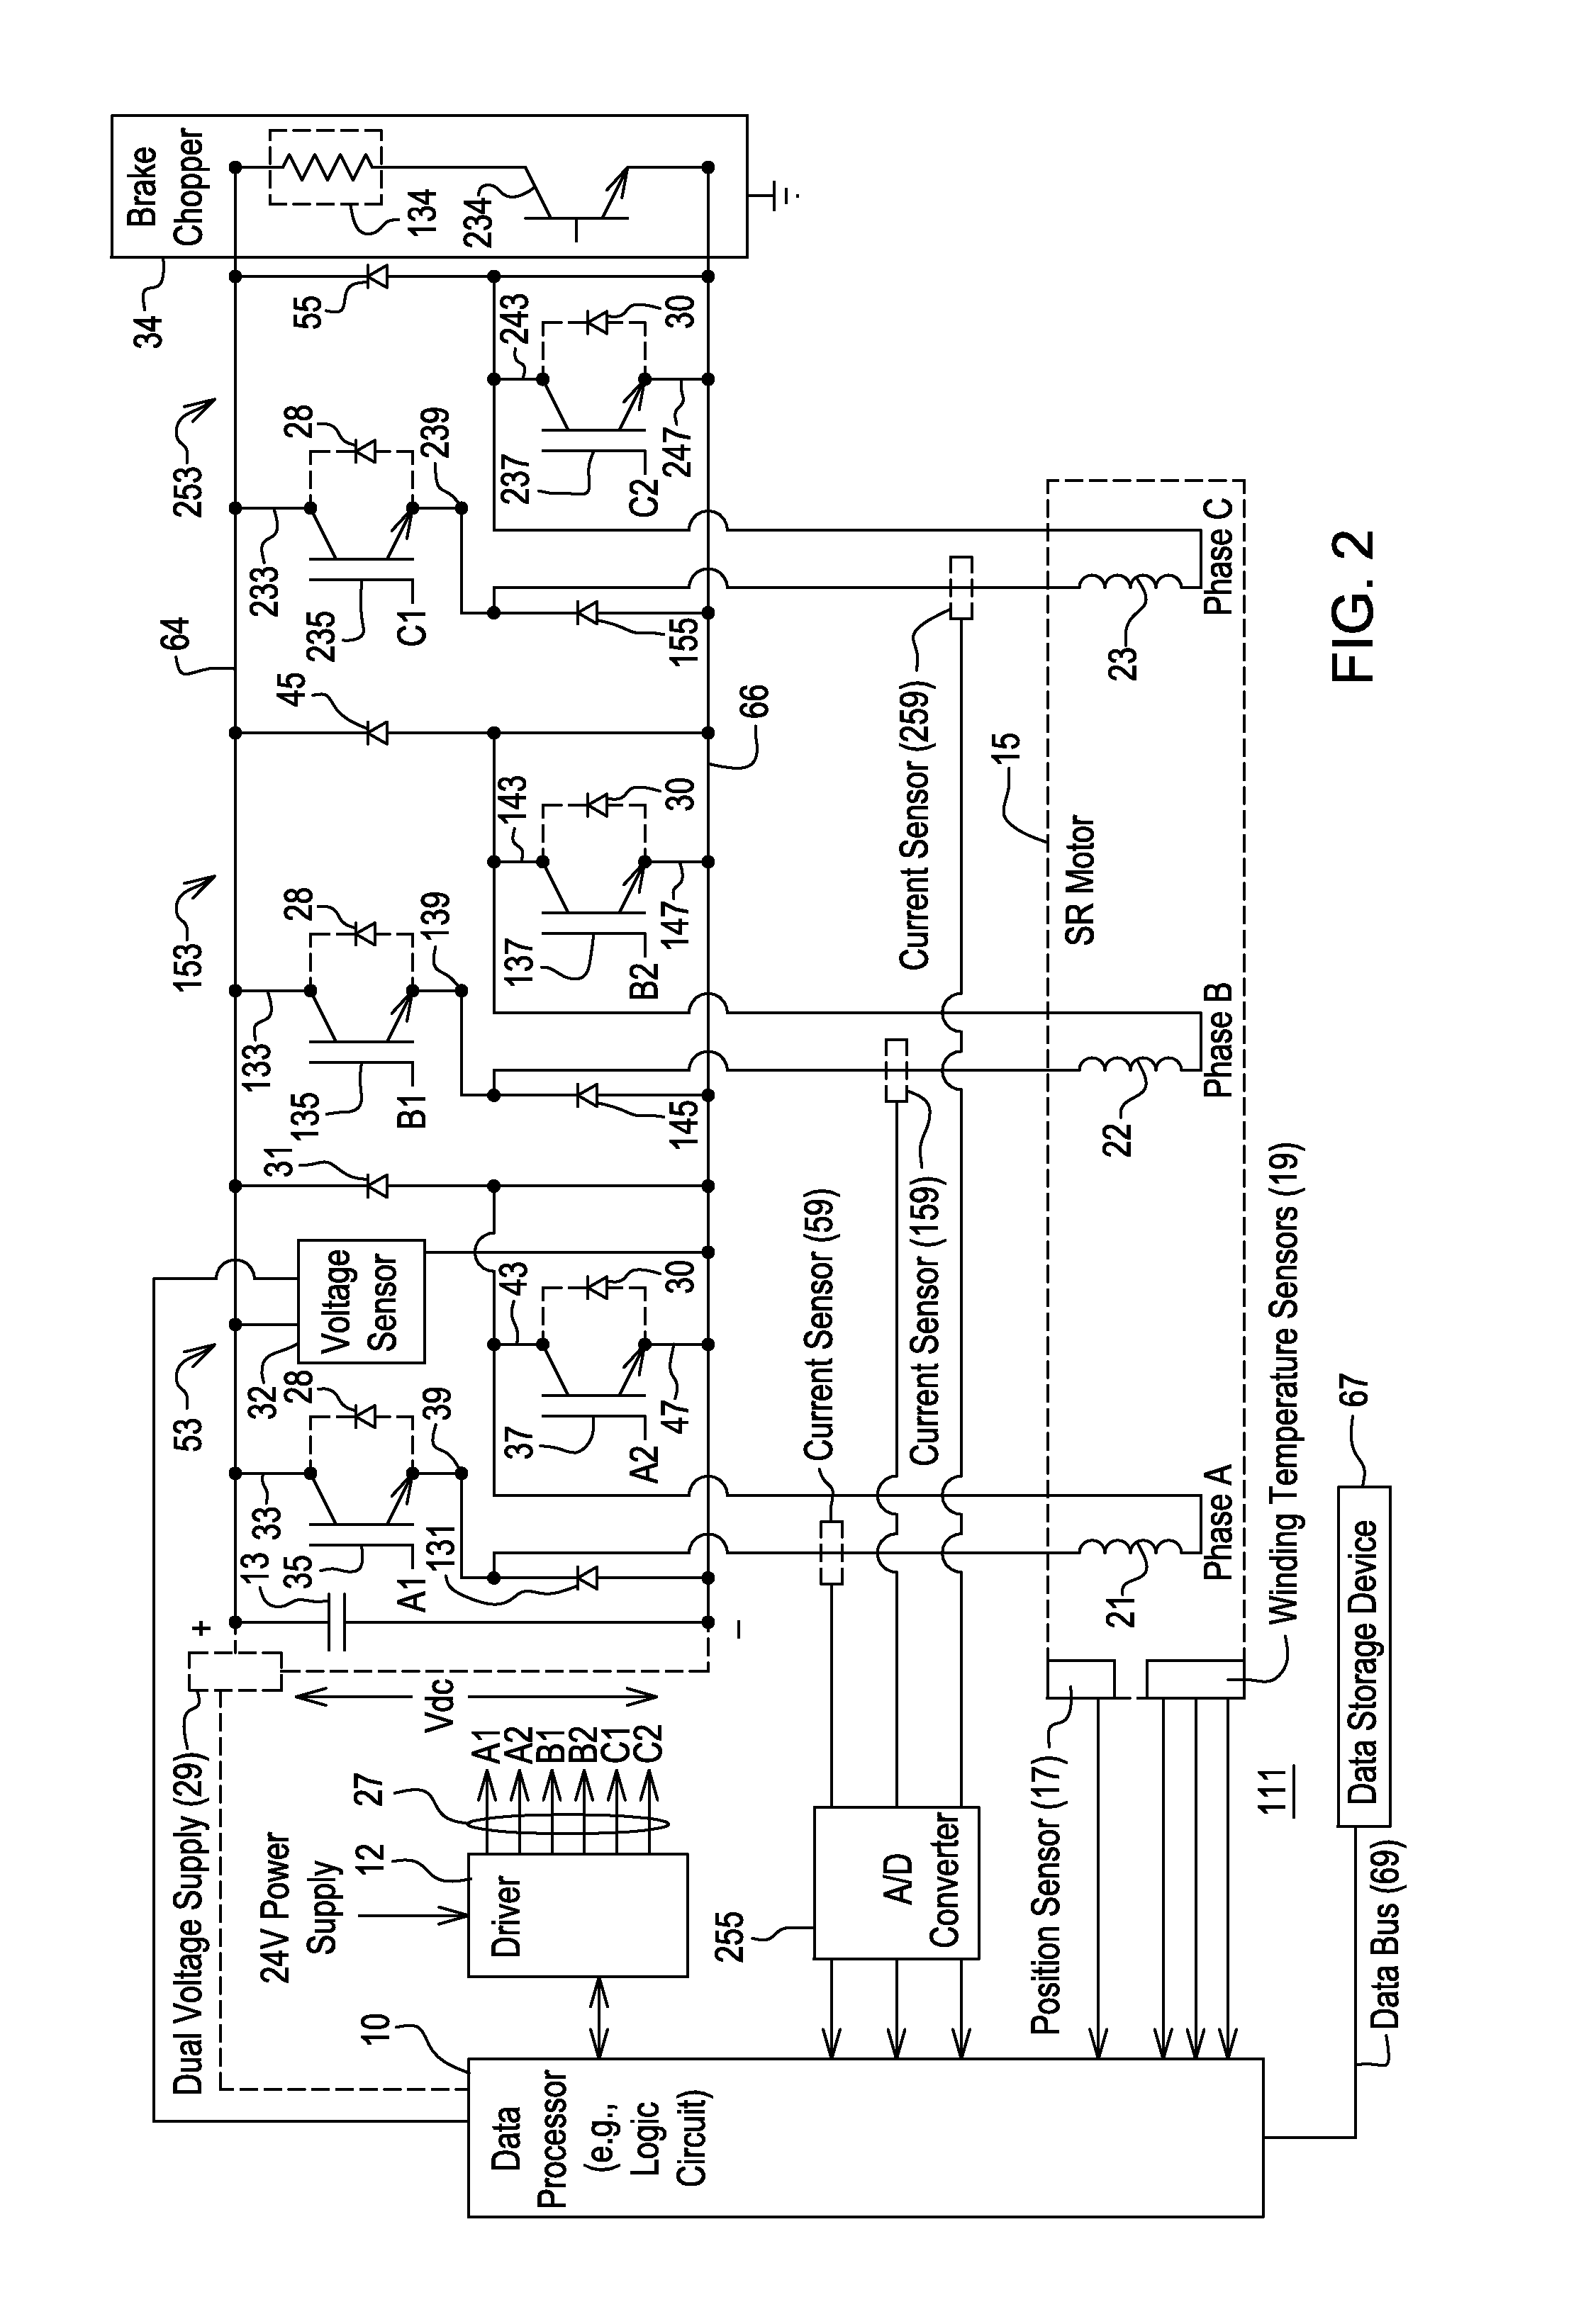 Method and controller for an electric motor with switch testing